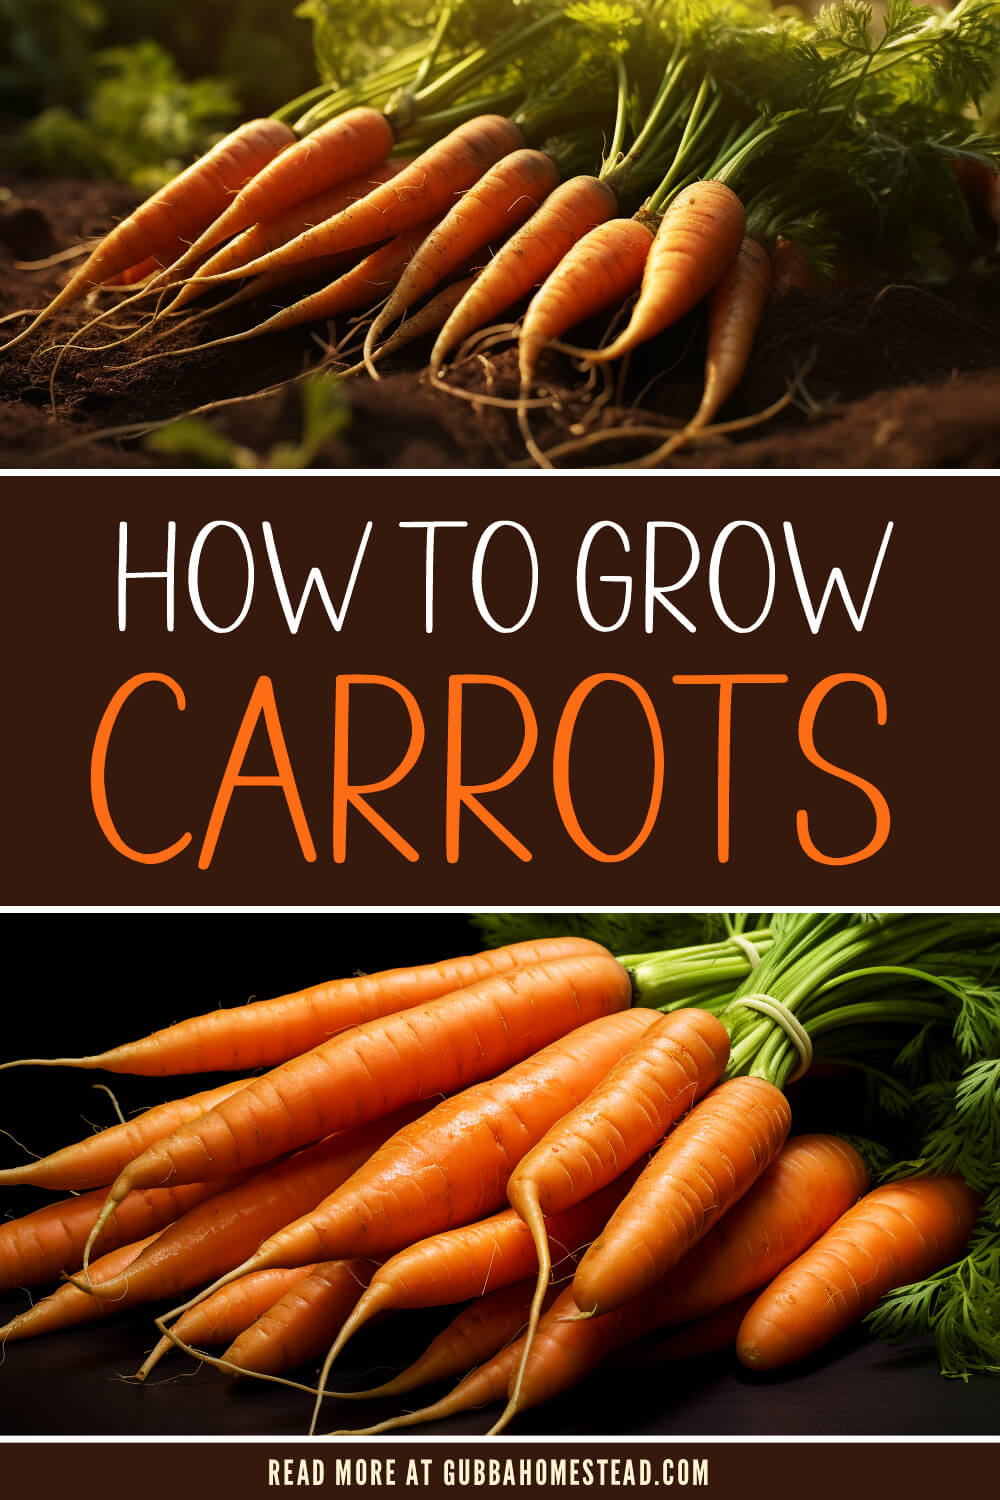 How to Grow Carrots: A Guide to Cultivating Delicious Orange Beauties